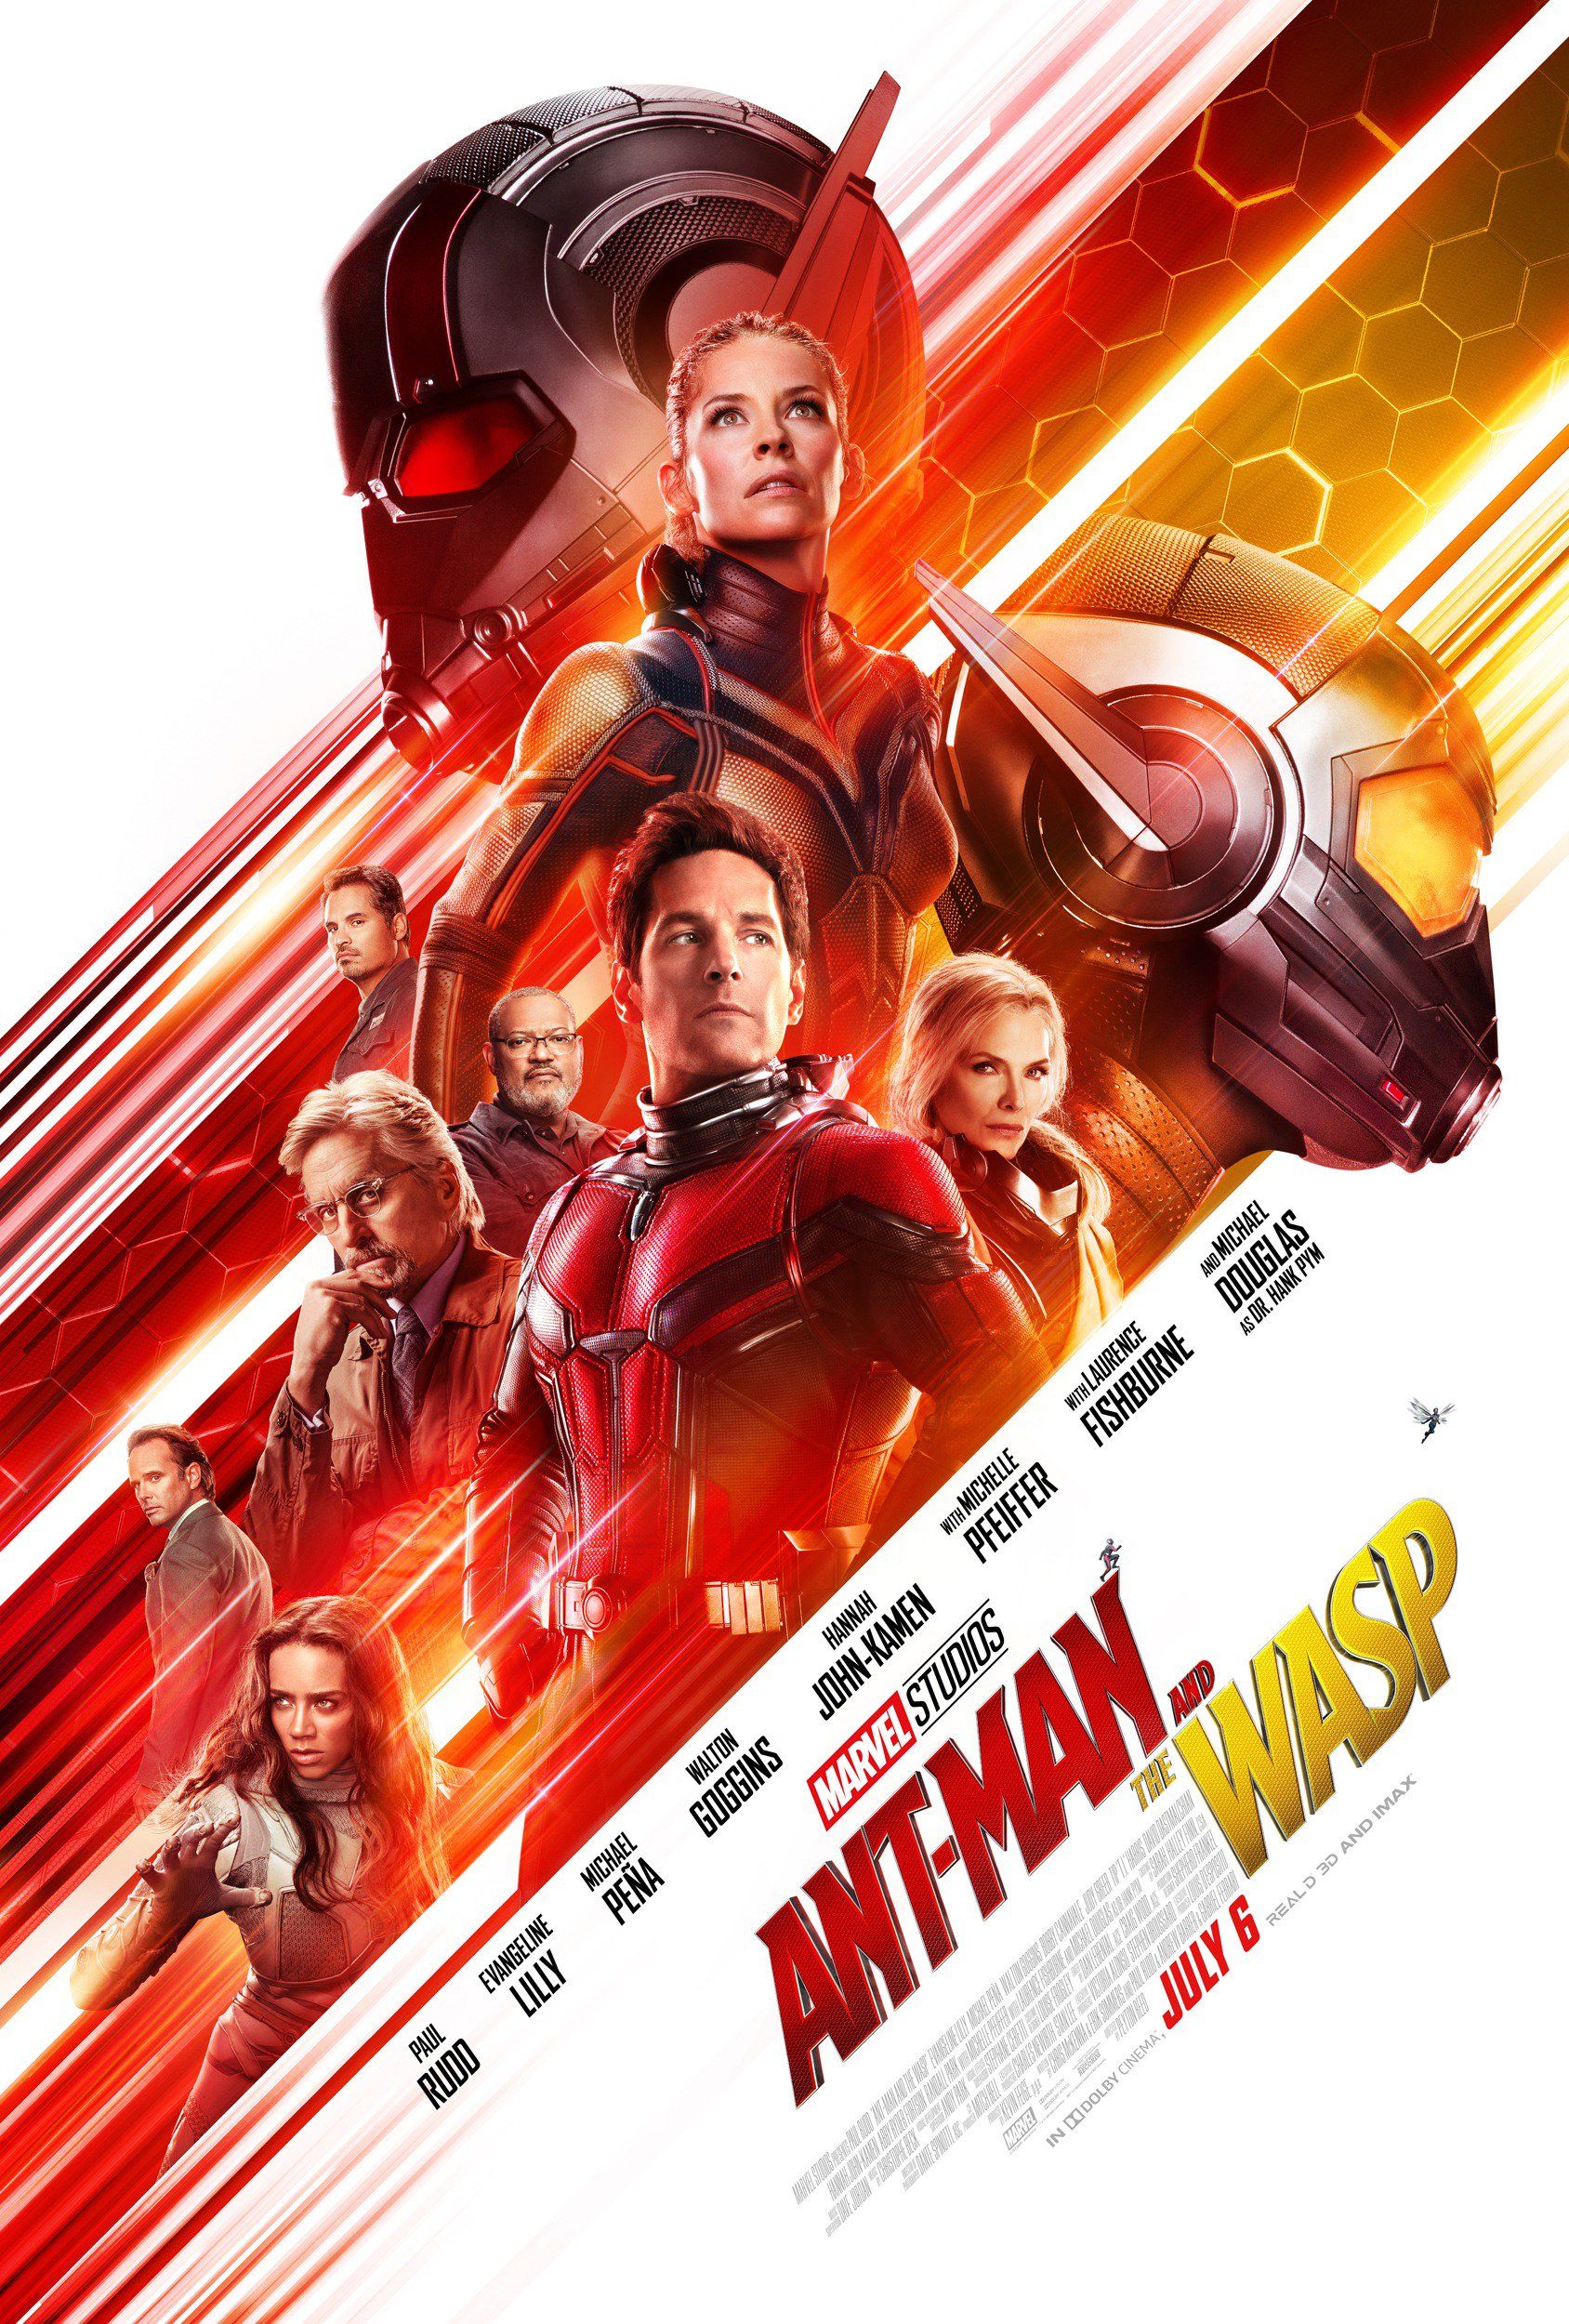 Ant-Man & the Wasp: Quantumania Close To Being Marvel's Lowest Rated Movie  - IMDb